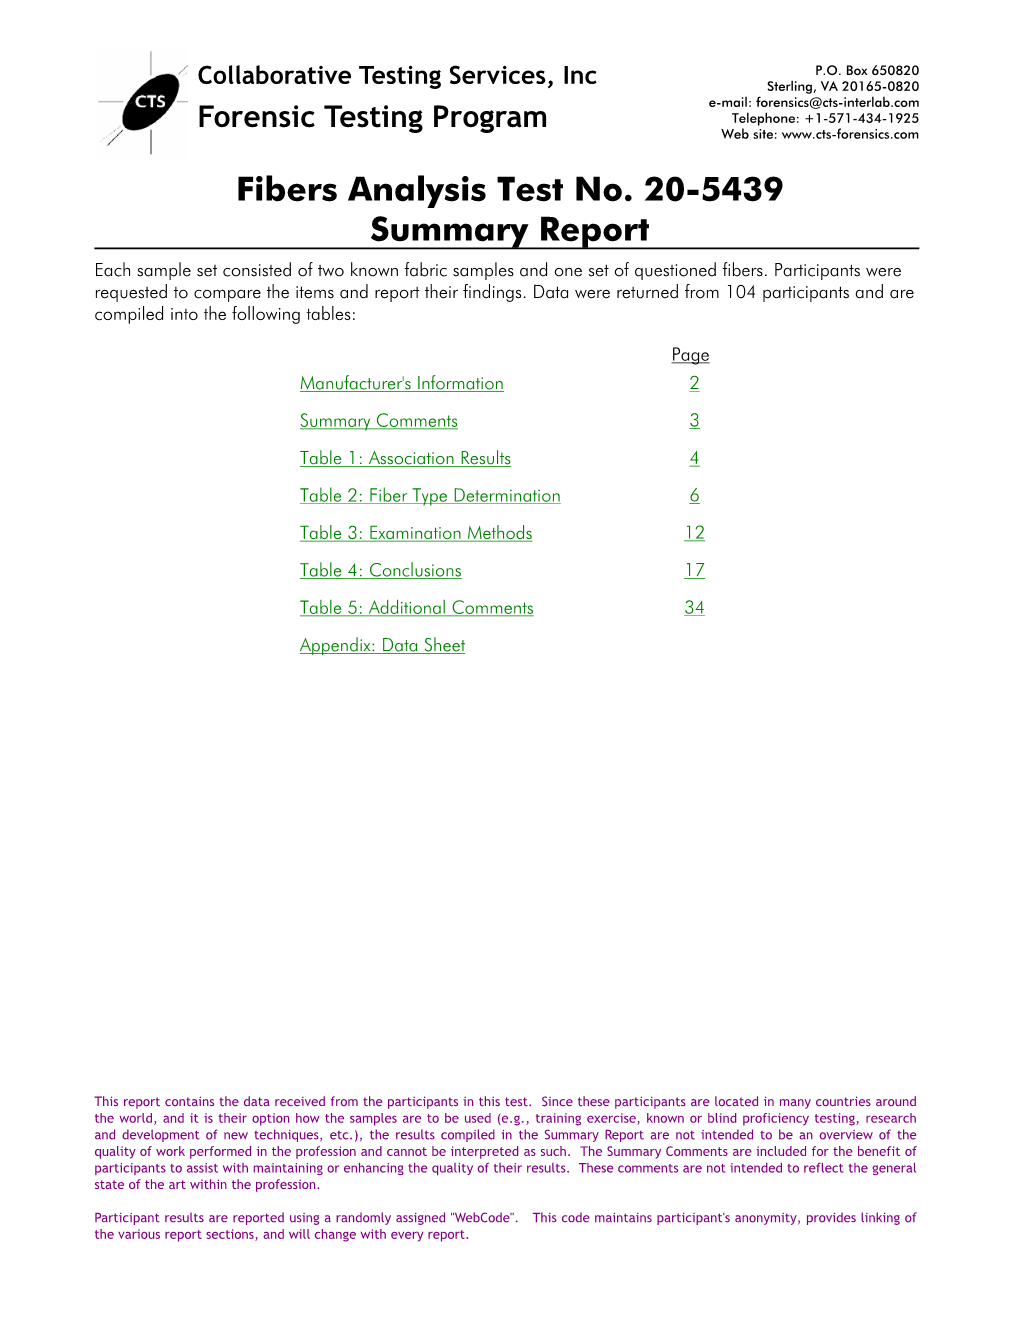 Fibers Analysis Test No. 20-5439 Summary Report Each Sample Set Consisted of Two Known Fabric Samples and One Set of Questioned Fibers